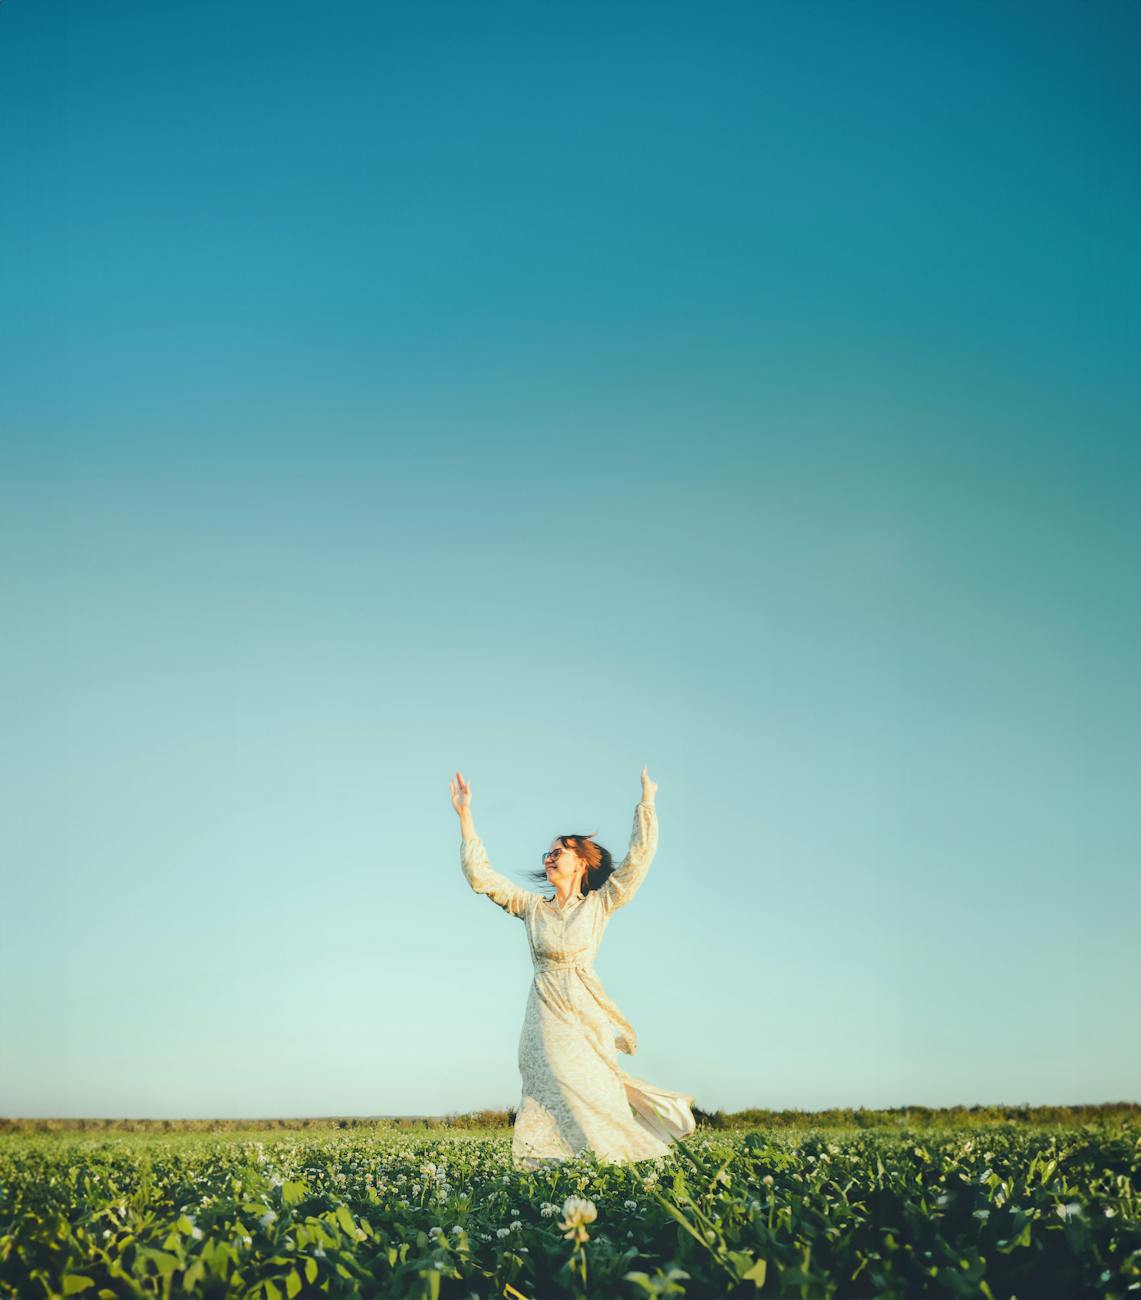 a young girl twirling at sunset in a field